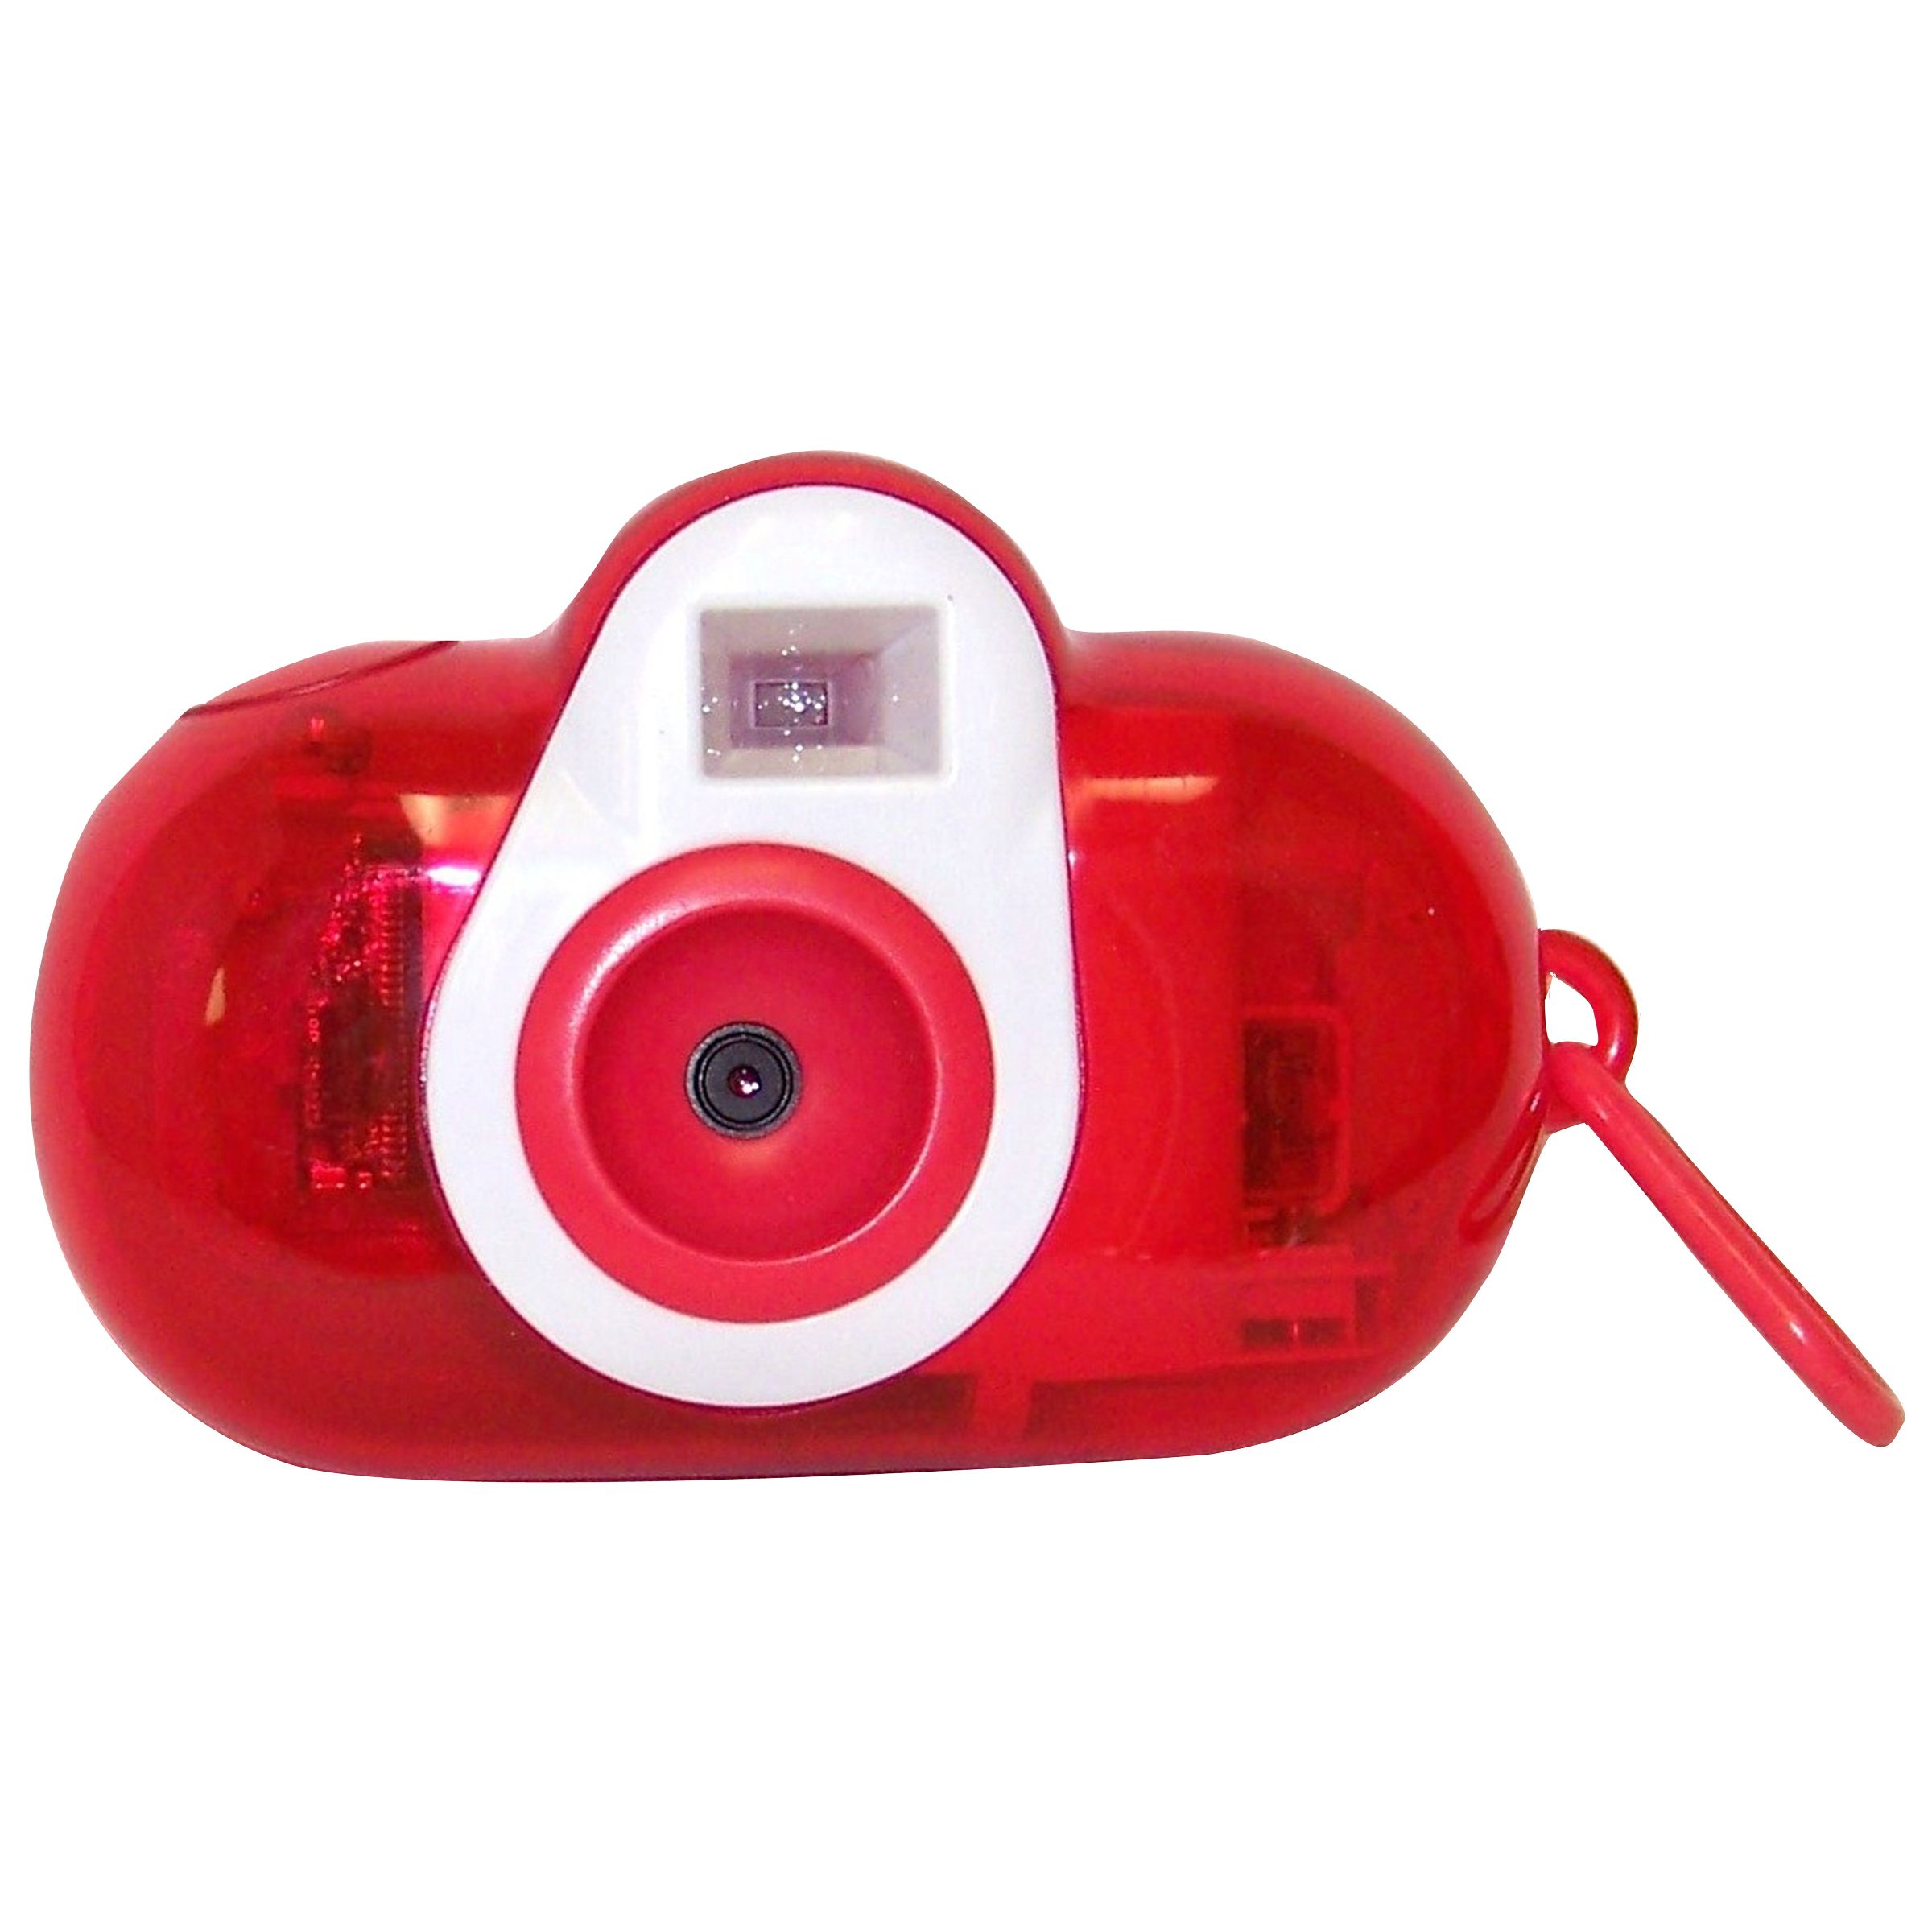 3-In-1 Squeeze DC150-B Digital Camera for Kids - Red